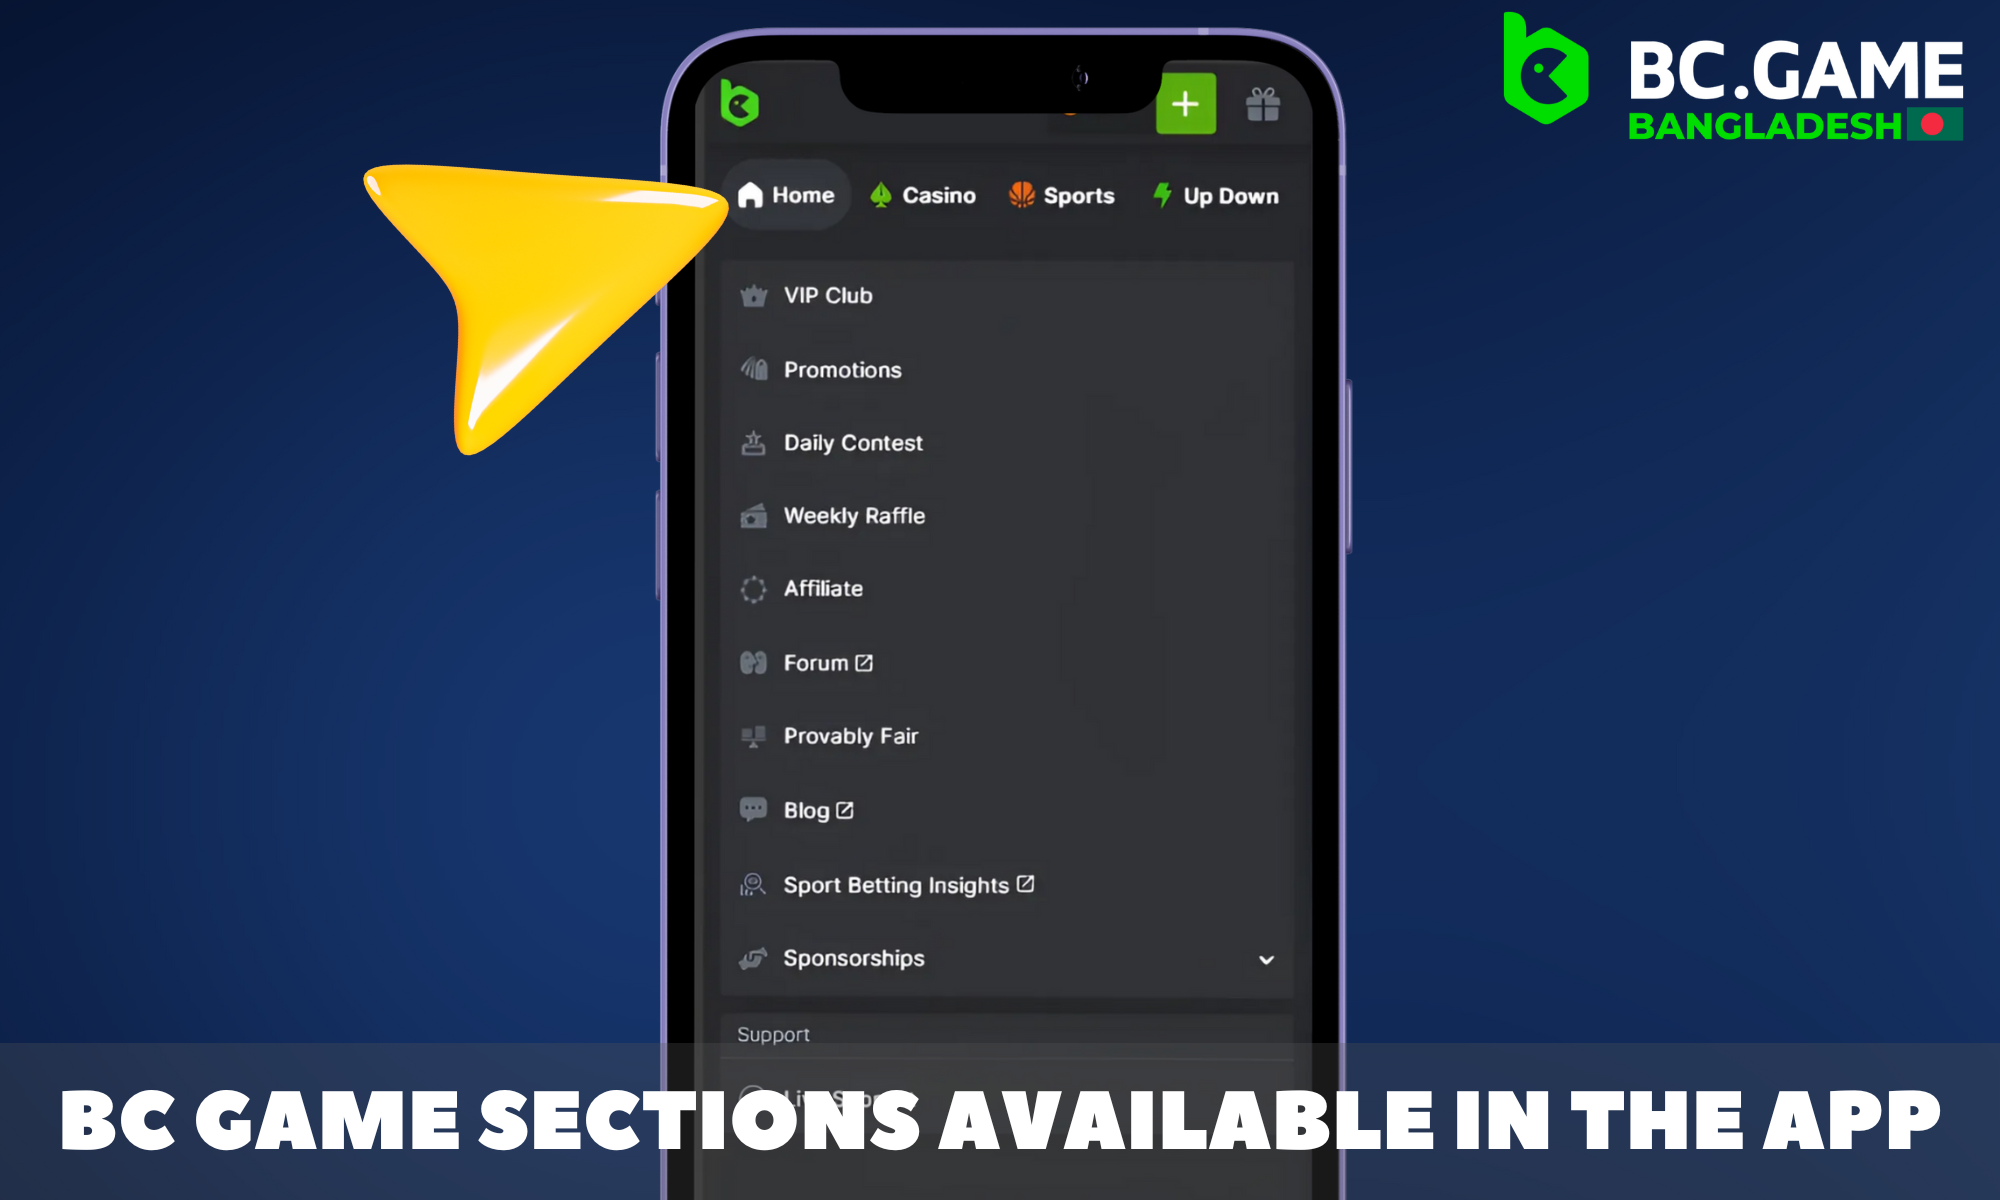 Overview of BC Game app sections